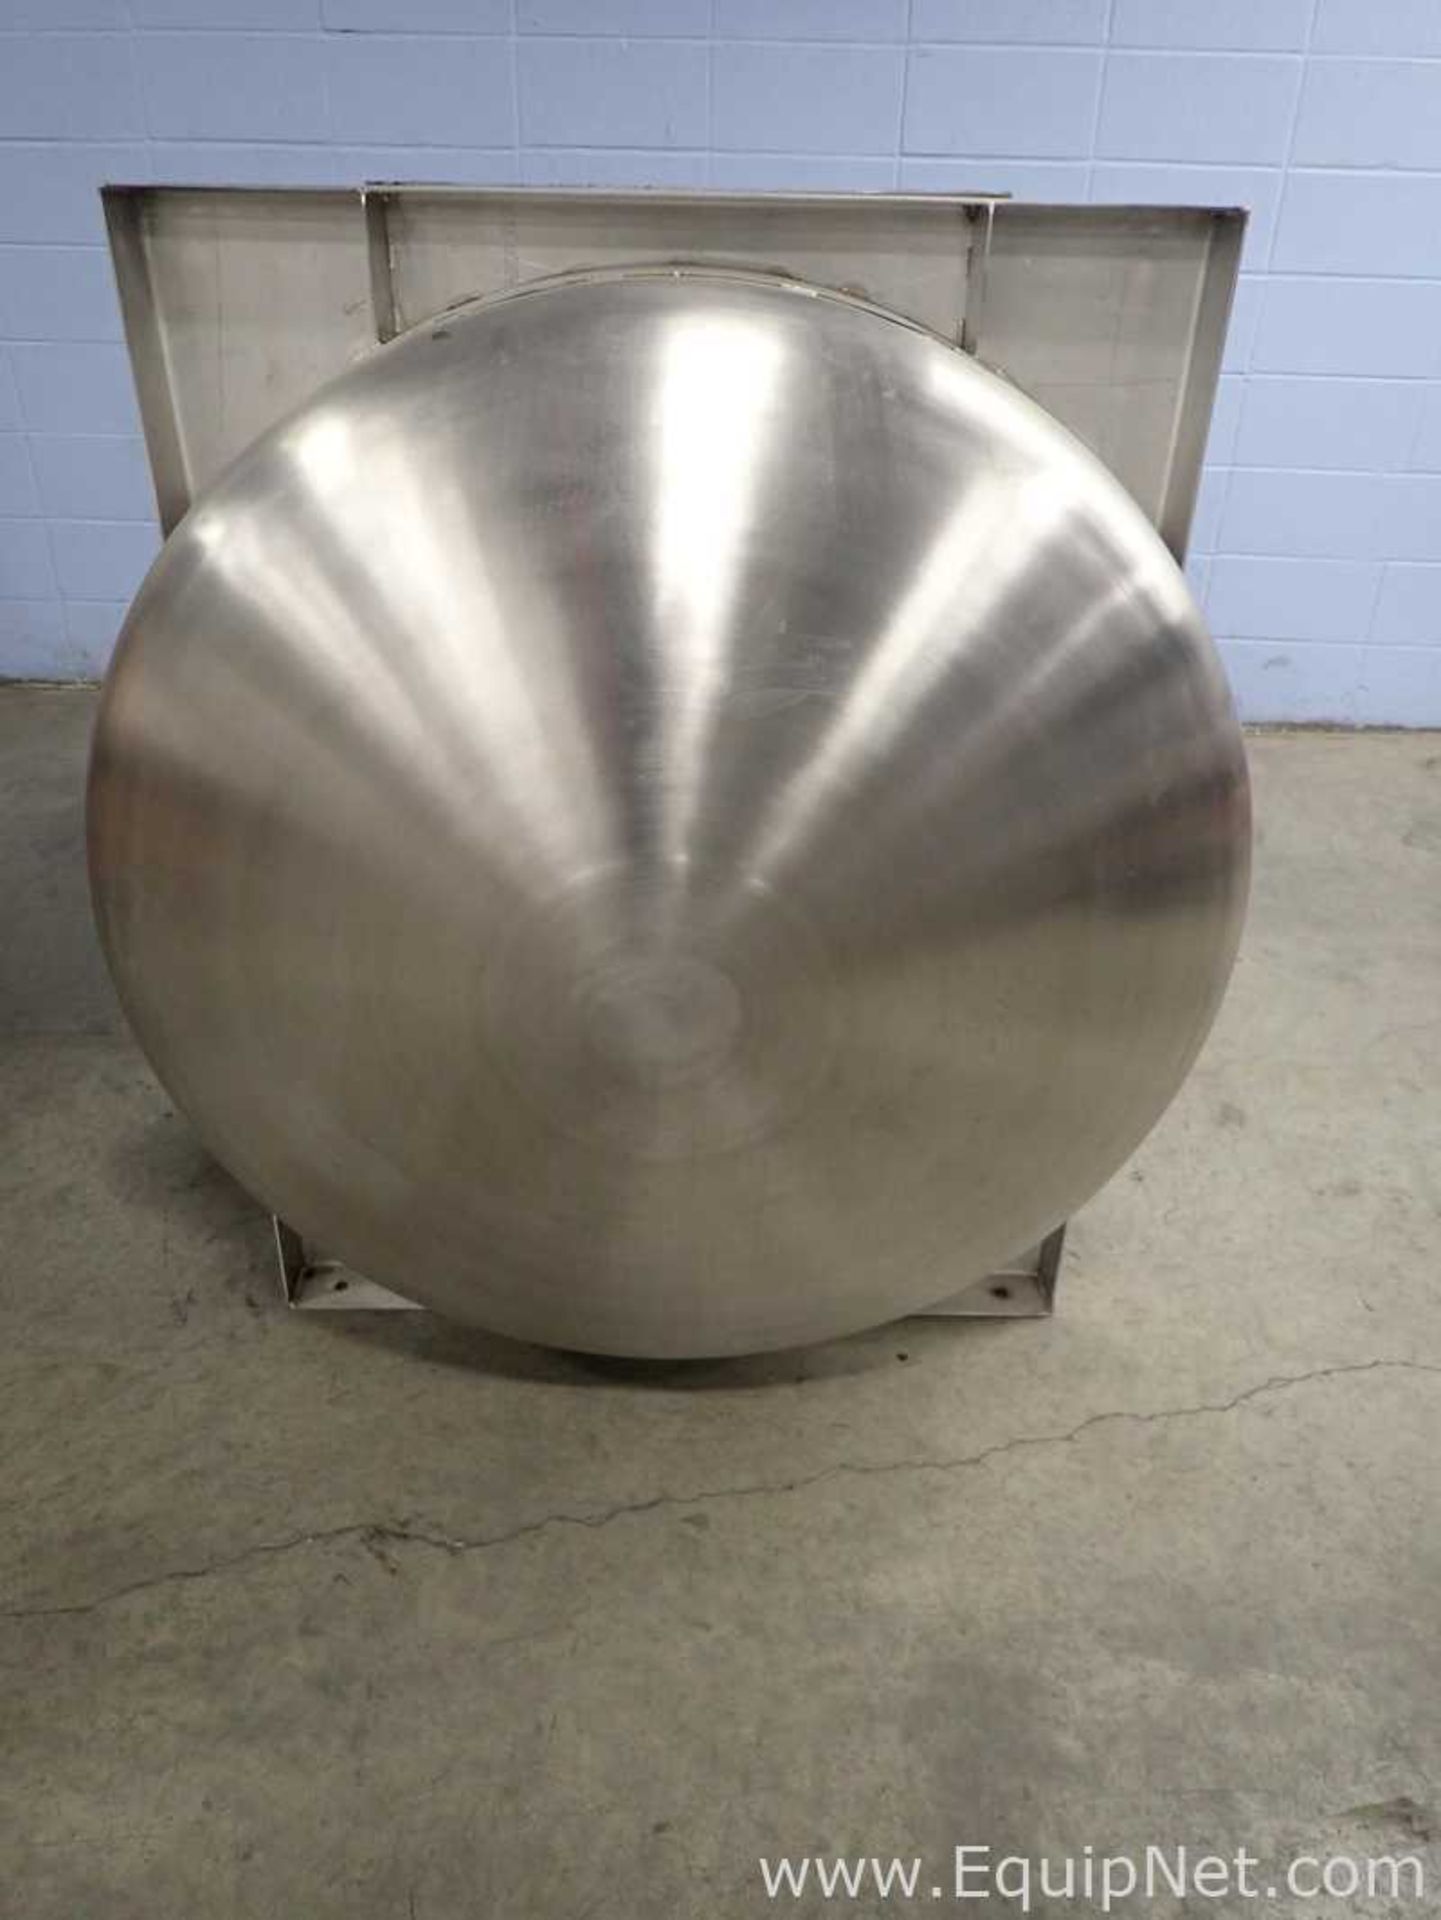 Specific Mechanical 341 Gallon Stainless Steel Brewing Tank - Image 8 of 11